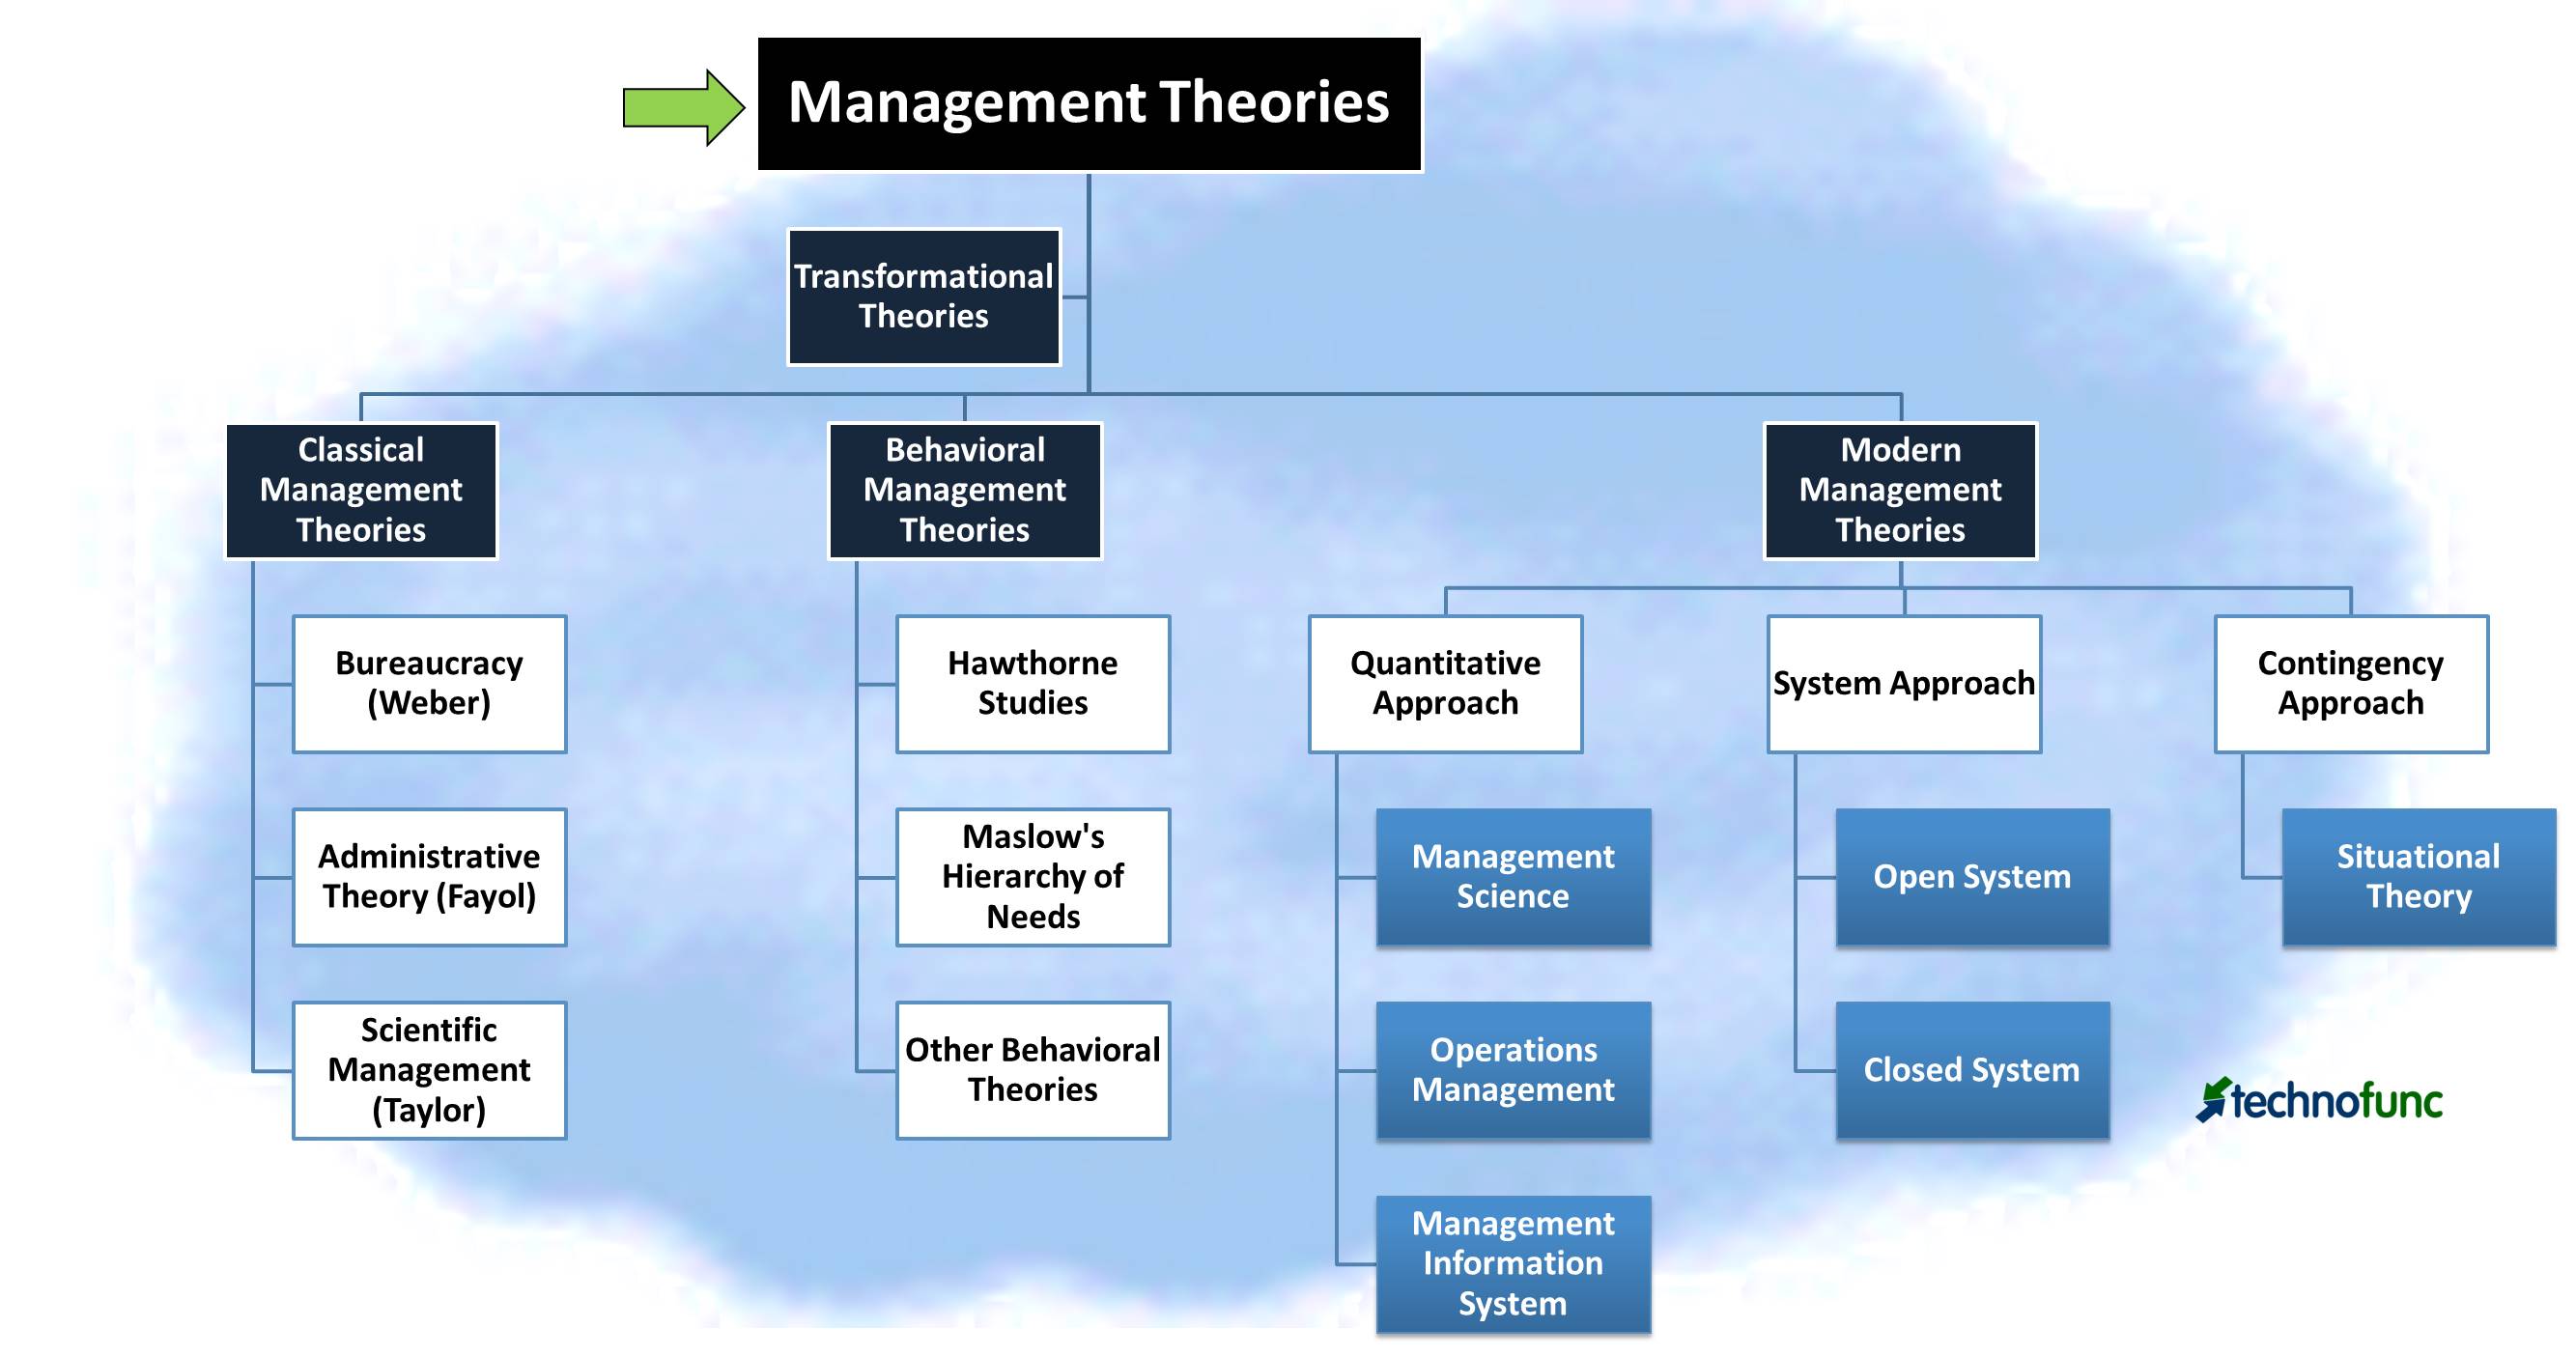 Theories Of Management